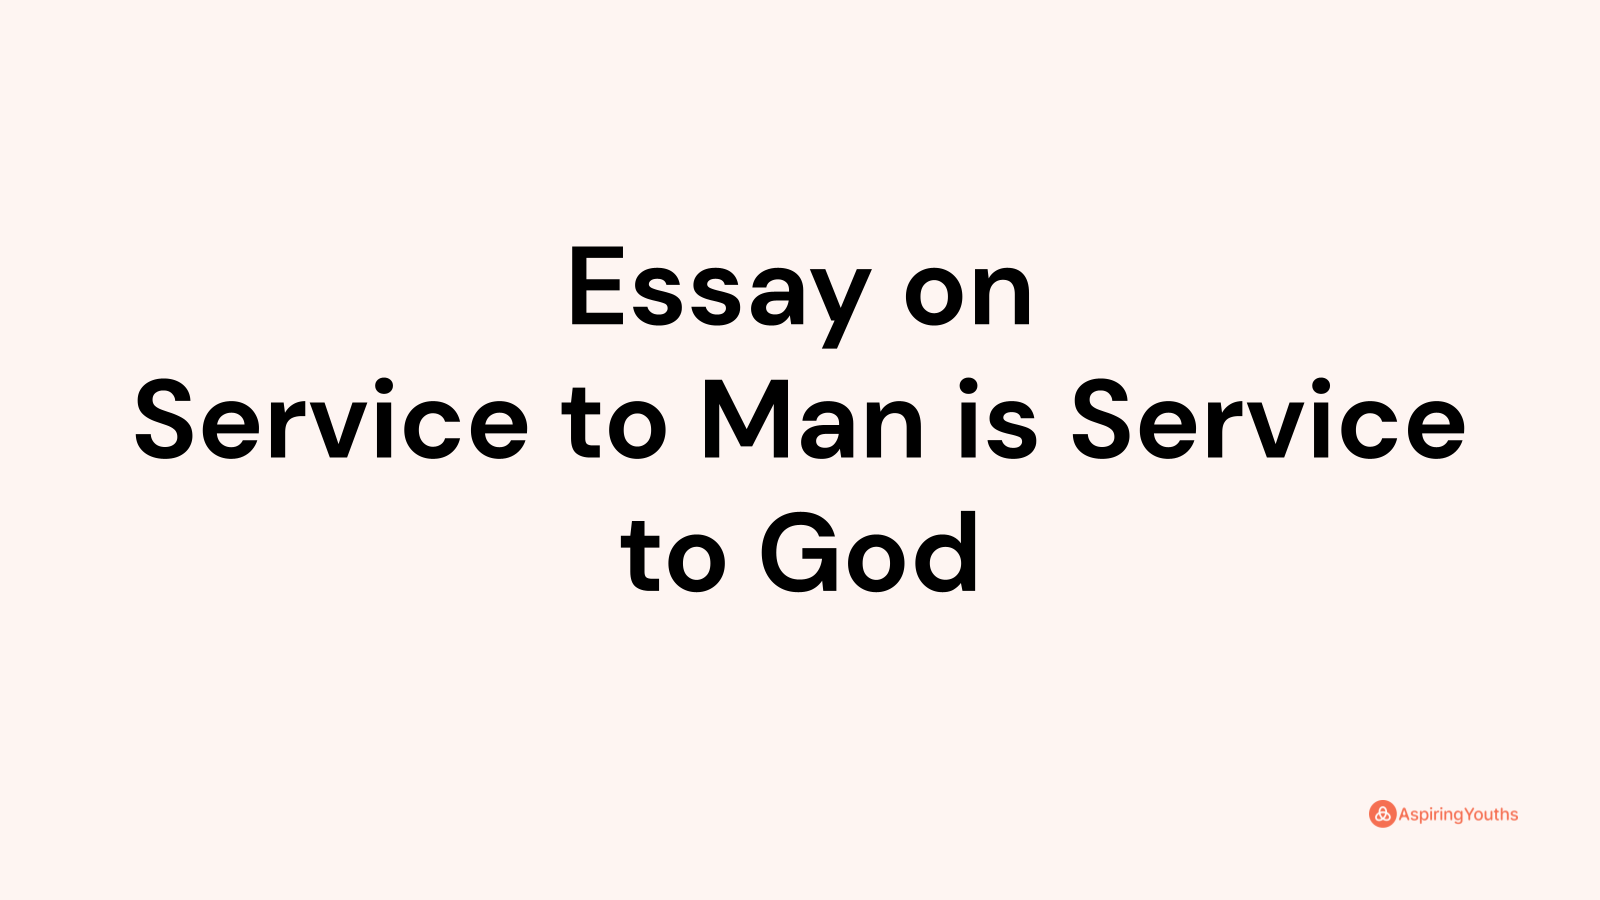 service to man is service to god essay in tamil